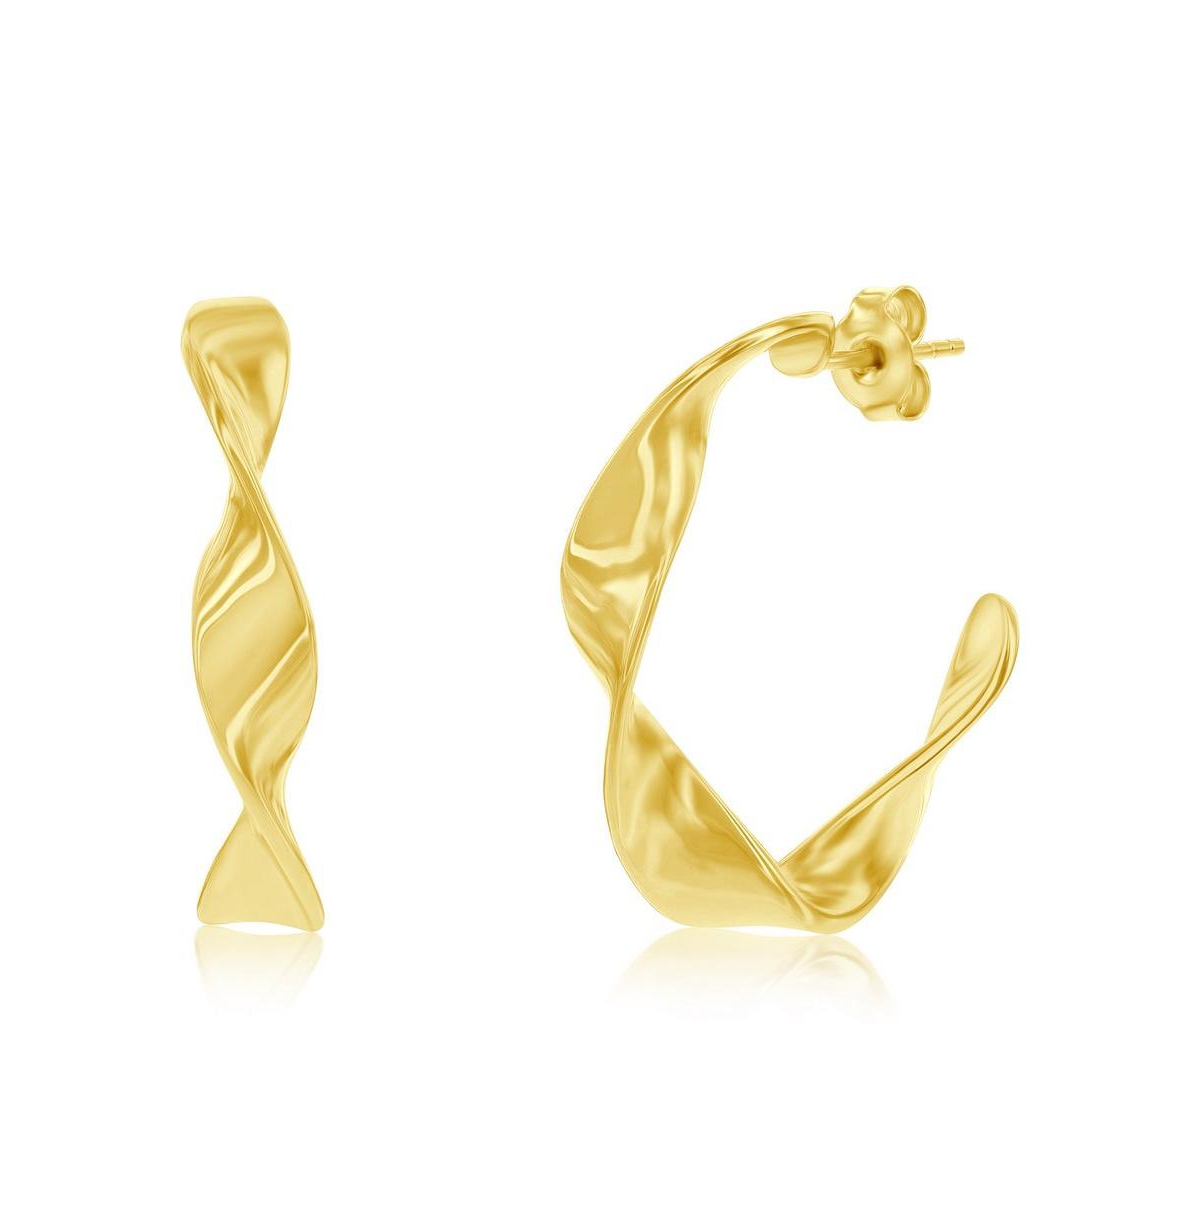 Gold Plated Over Sterling Silver 28mm Twist Hoop Earrings - Gold